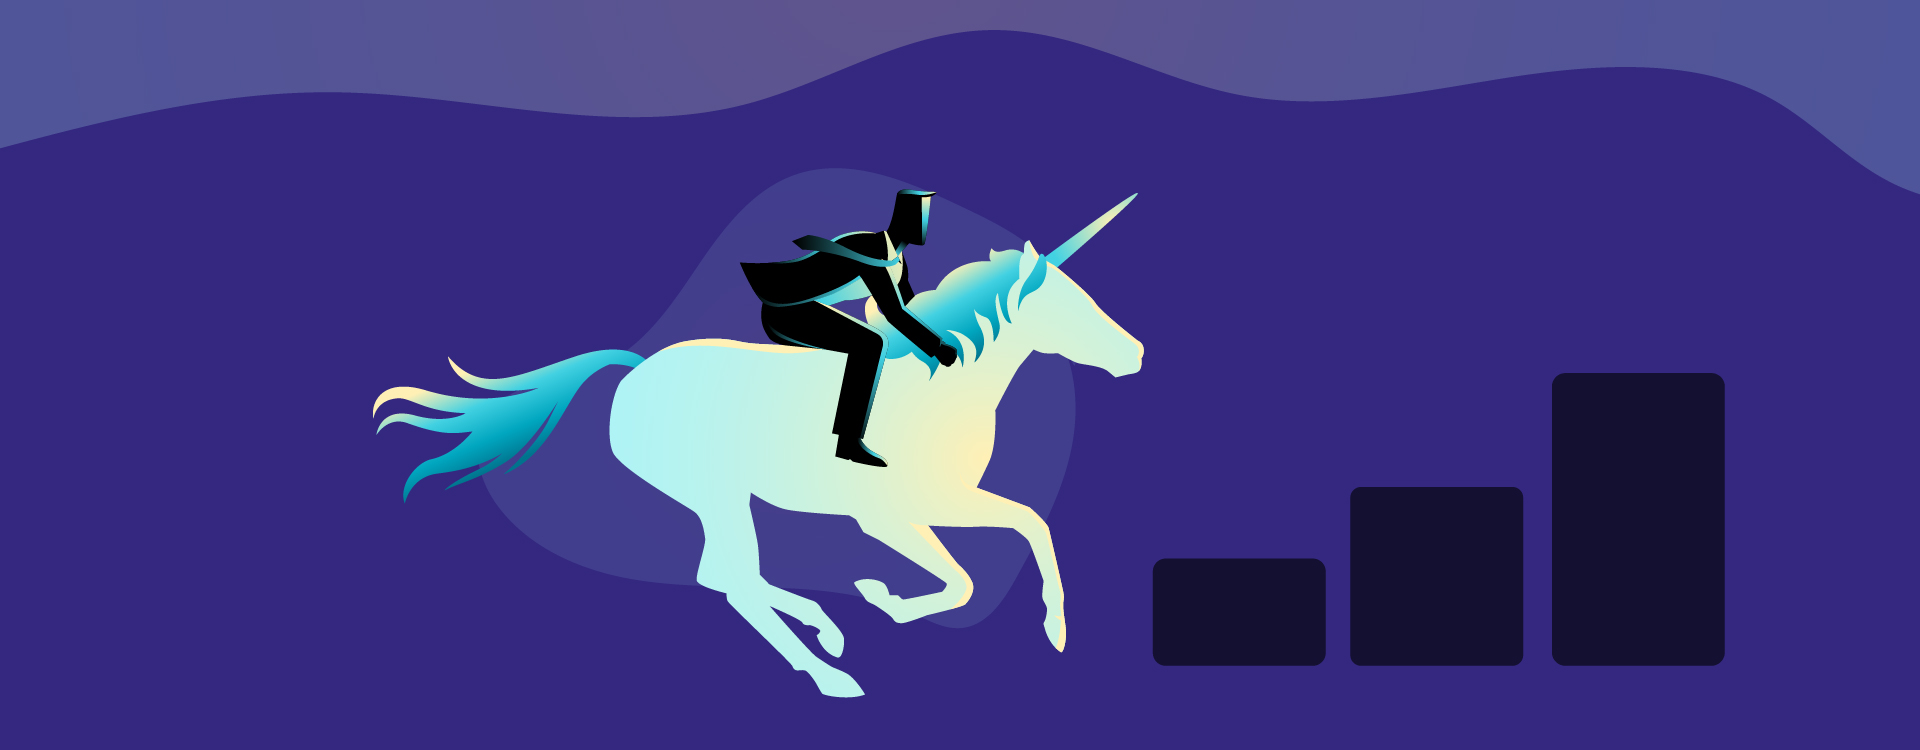 Startup Unicorns Expected To Recruit Rapidly: 2021 Brings In New Trends